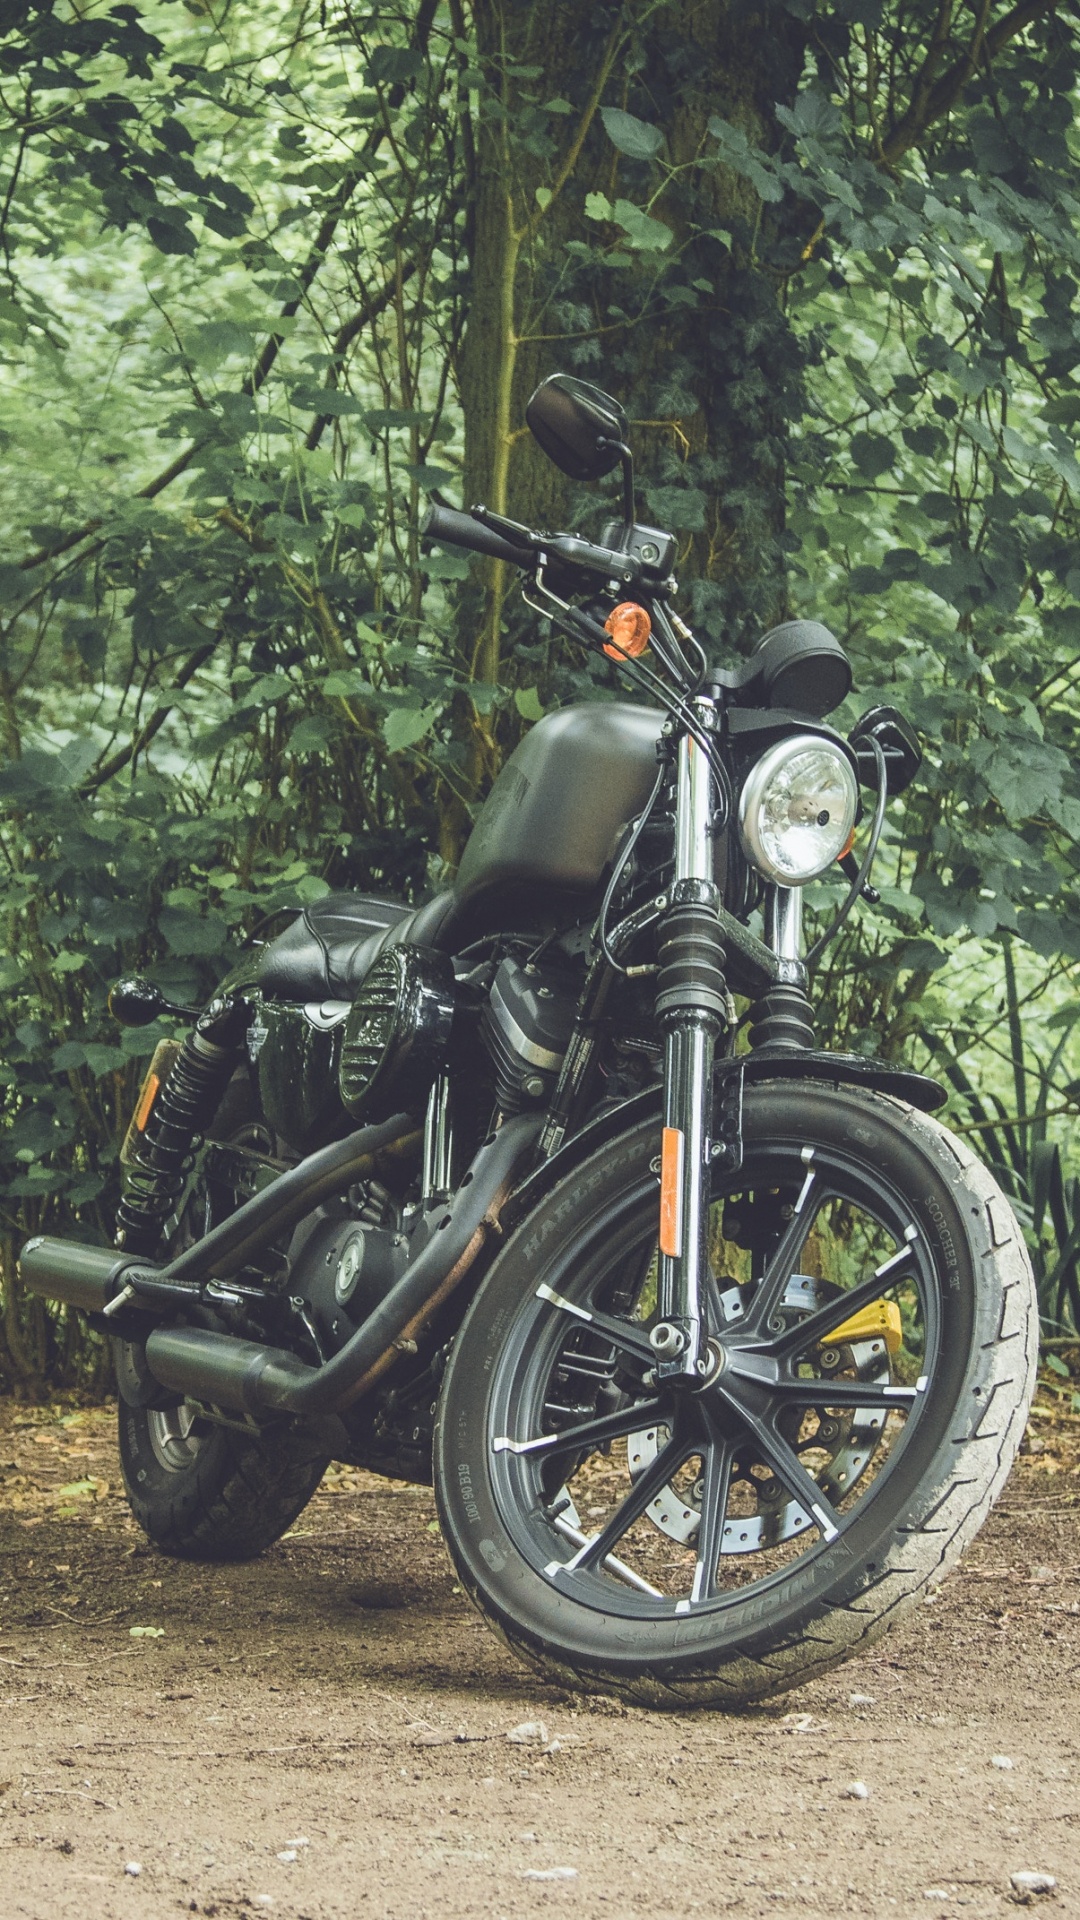 Black Motorcycle Parked on Dirt Road in Between Green Trees During Daytime. Wallpaper in 1080x1920 Resolution